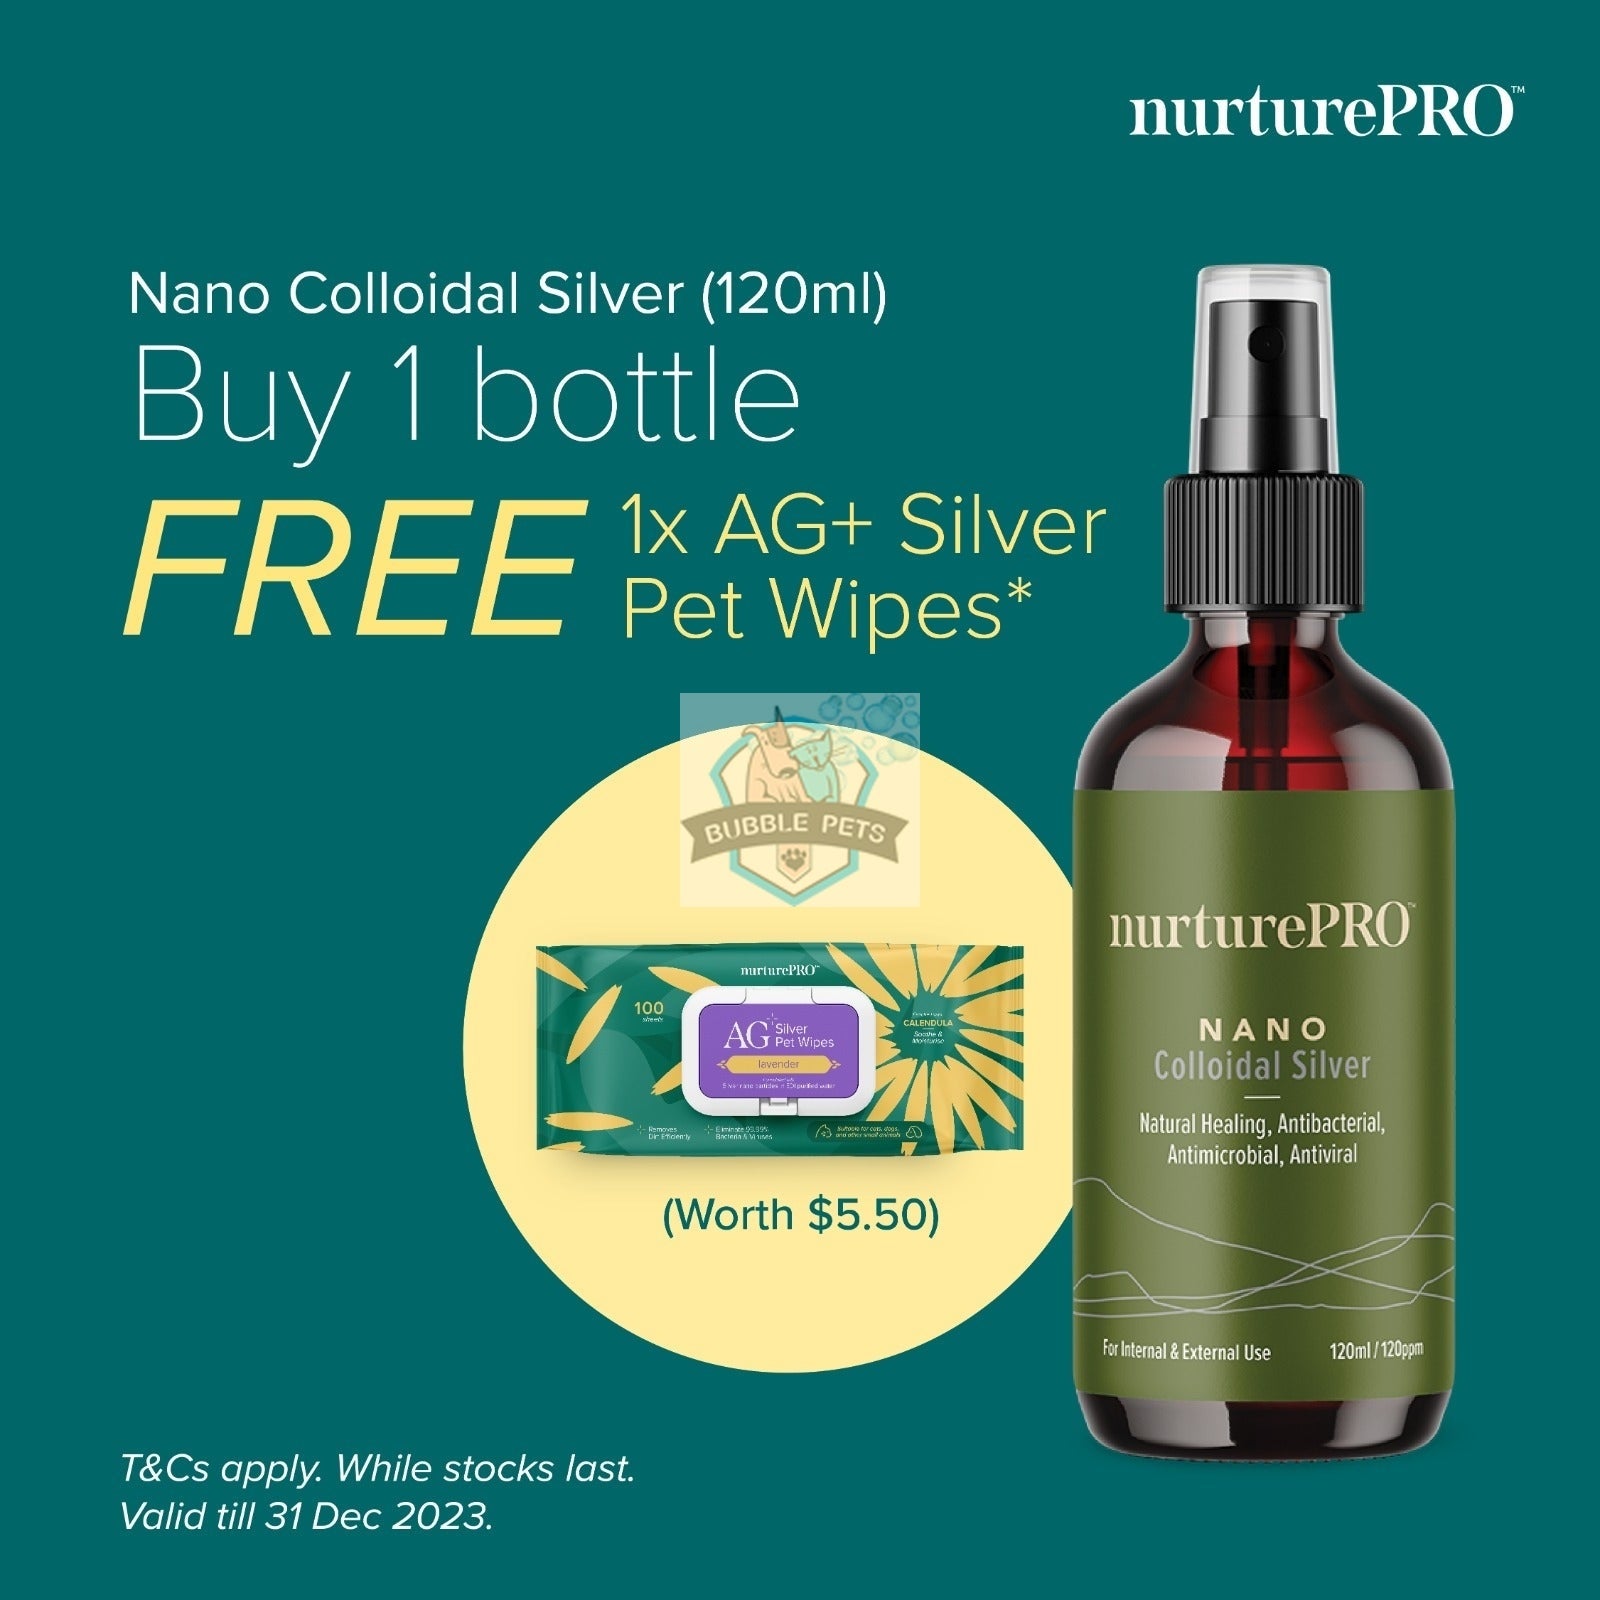 PROMO: Buy 1 bottle Colloidal Silver 60ml, Get 1 FREE AG+ Silver Pet Wipes